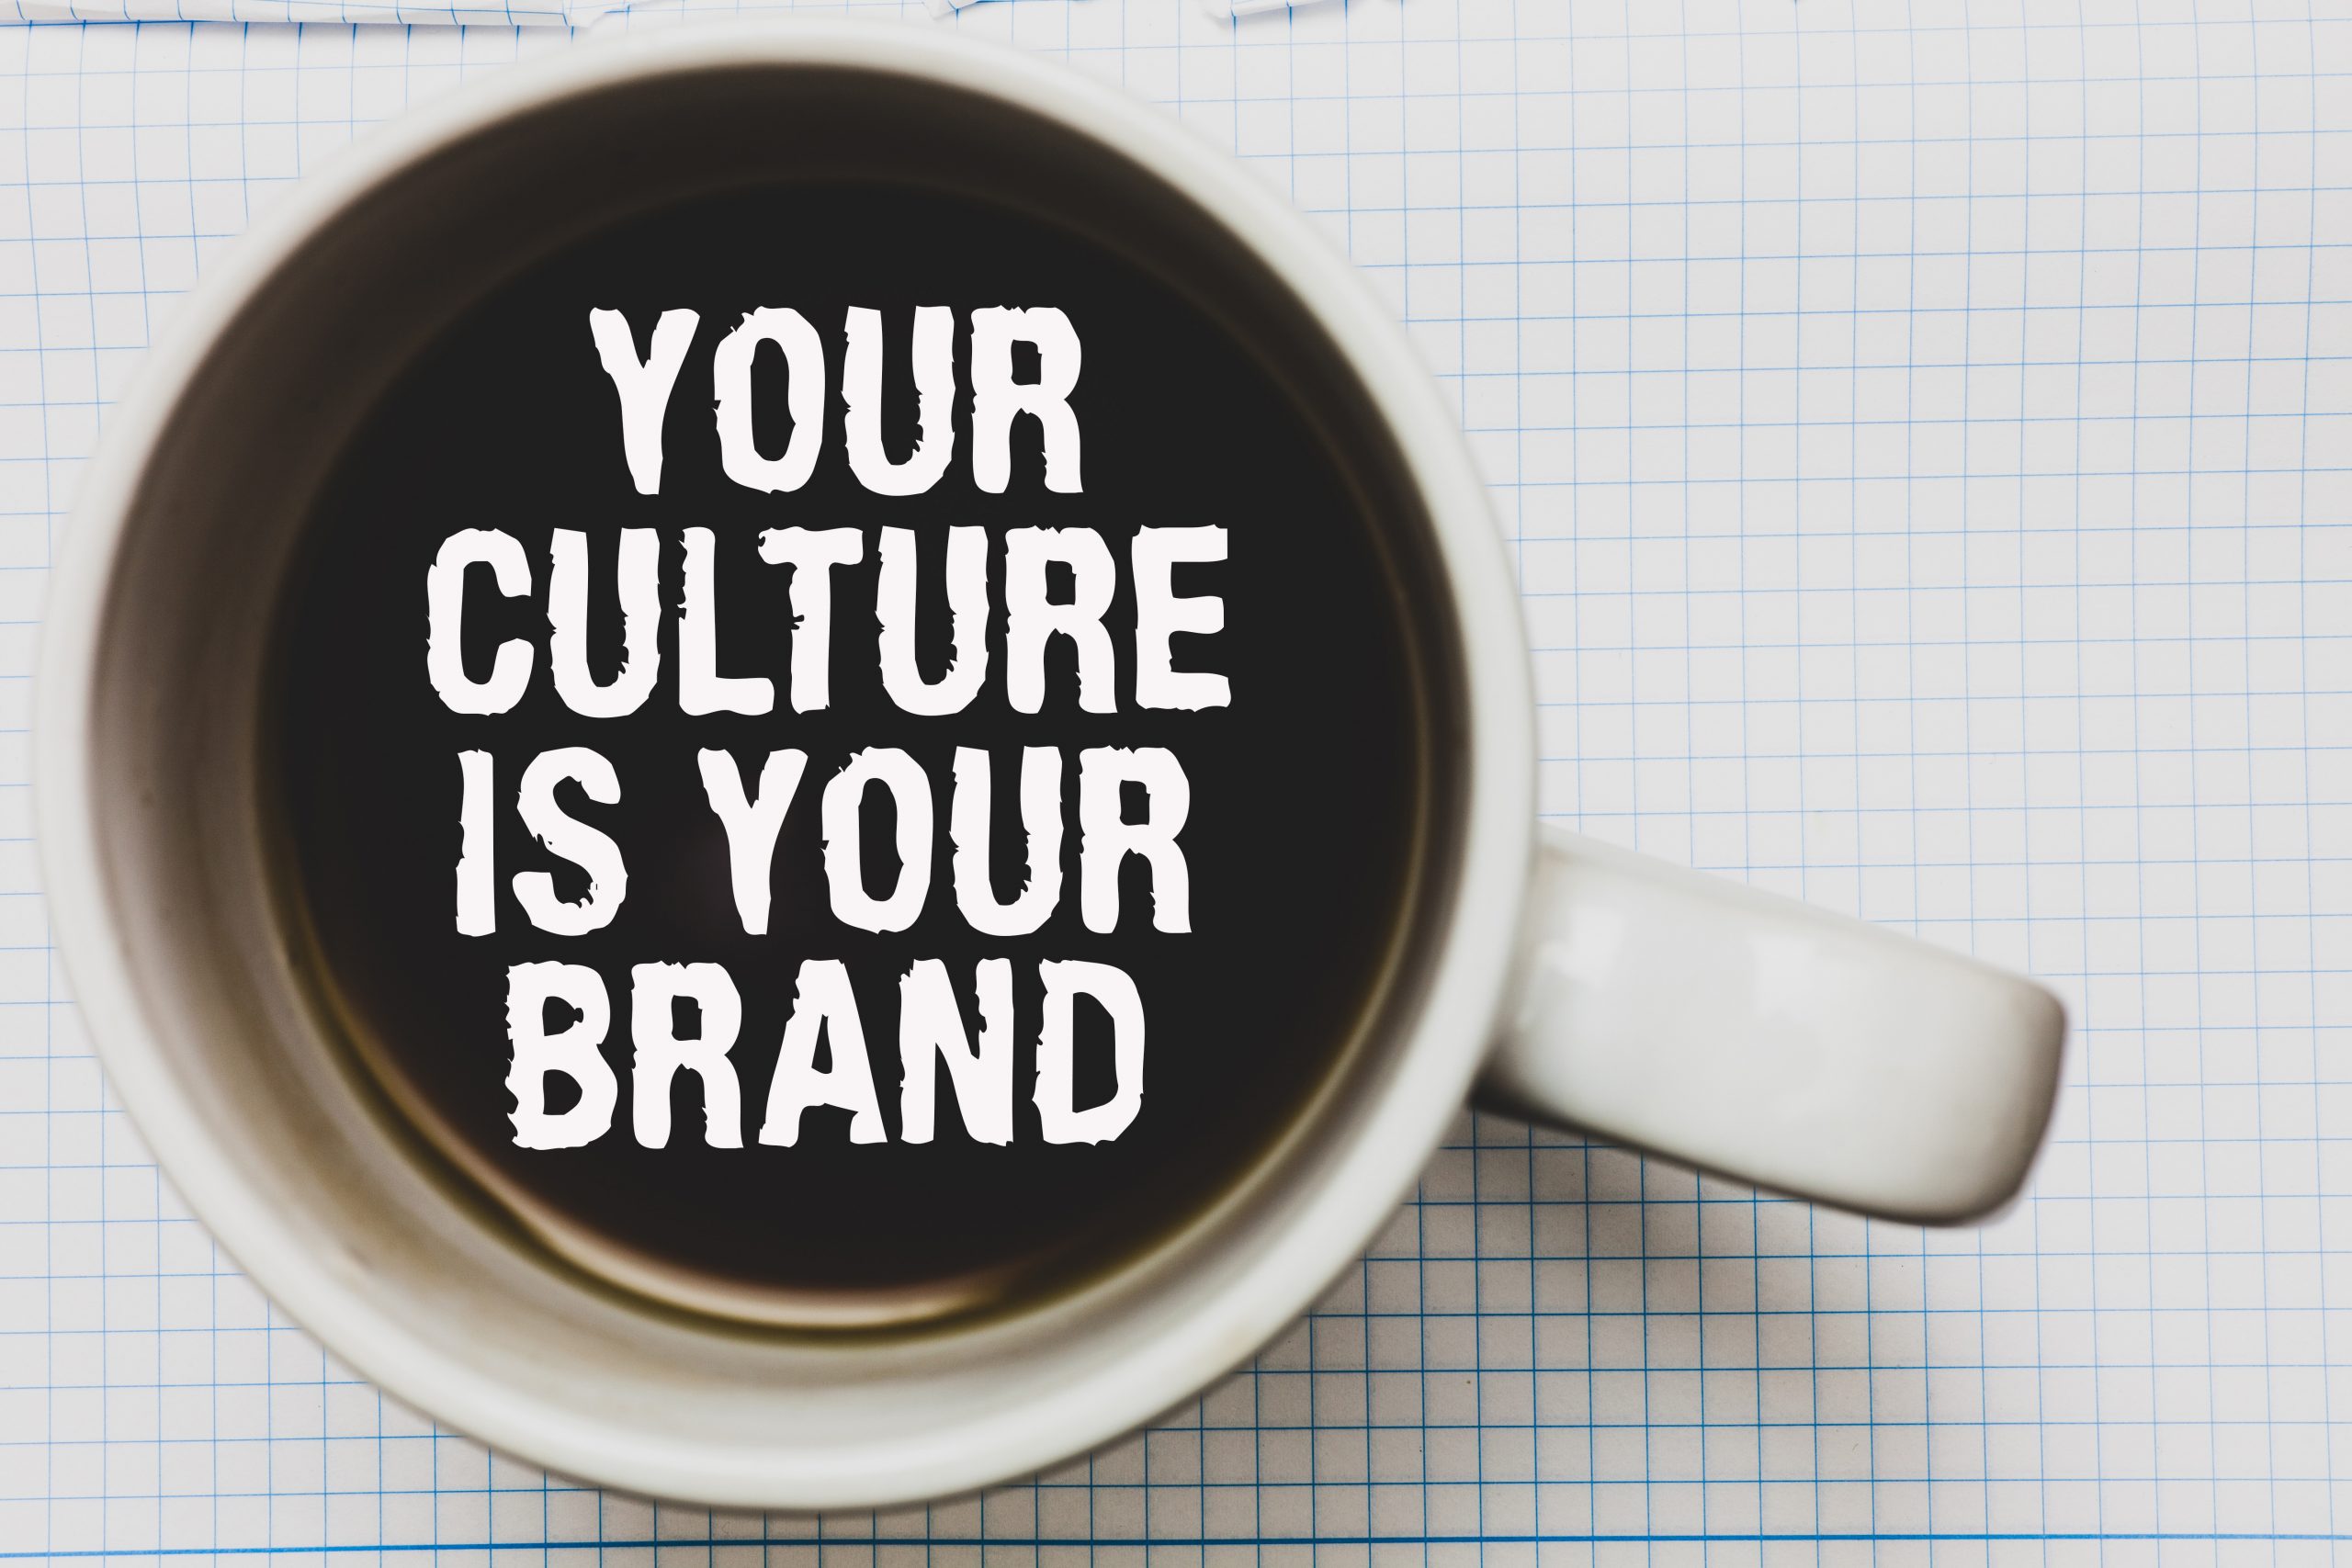 Promoting your company culture: Marketing through positivity